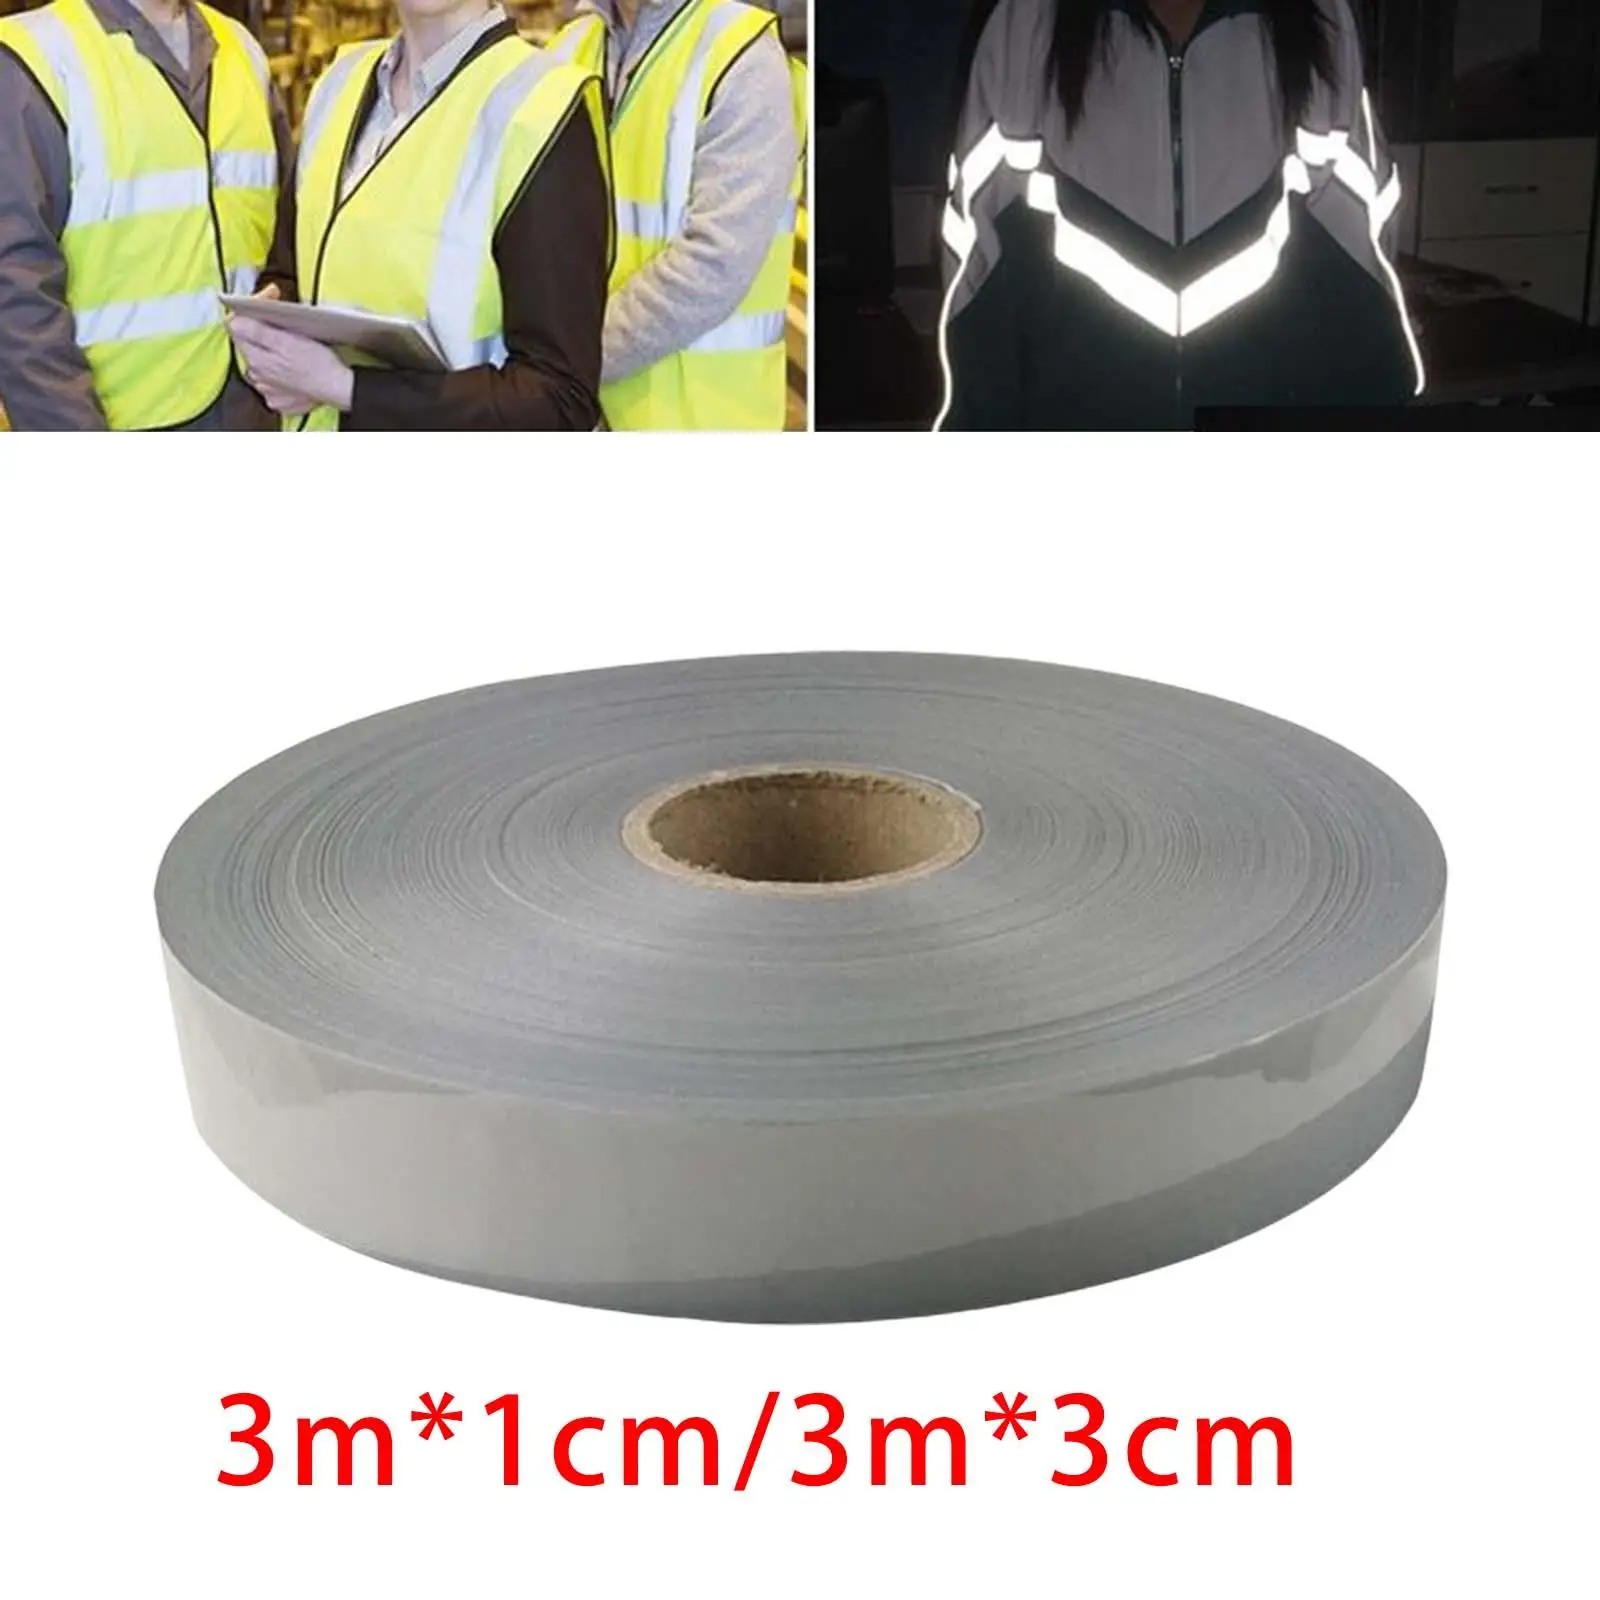 Iron On Reflective Tape Durable DIY Heat Transfer Vinyl Film Reflector Tape Waterproof Fabric for Clothes Pants Outdoor